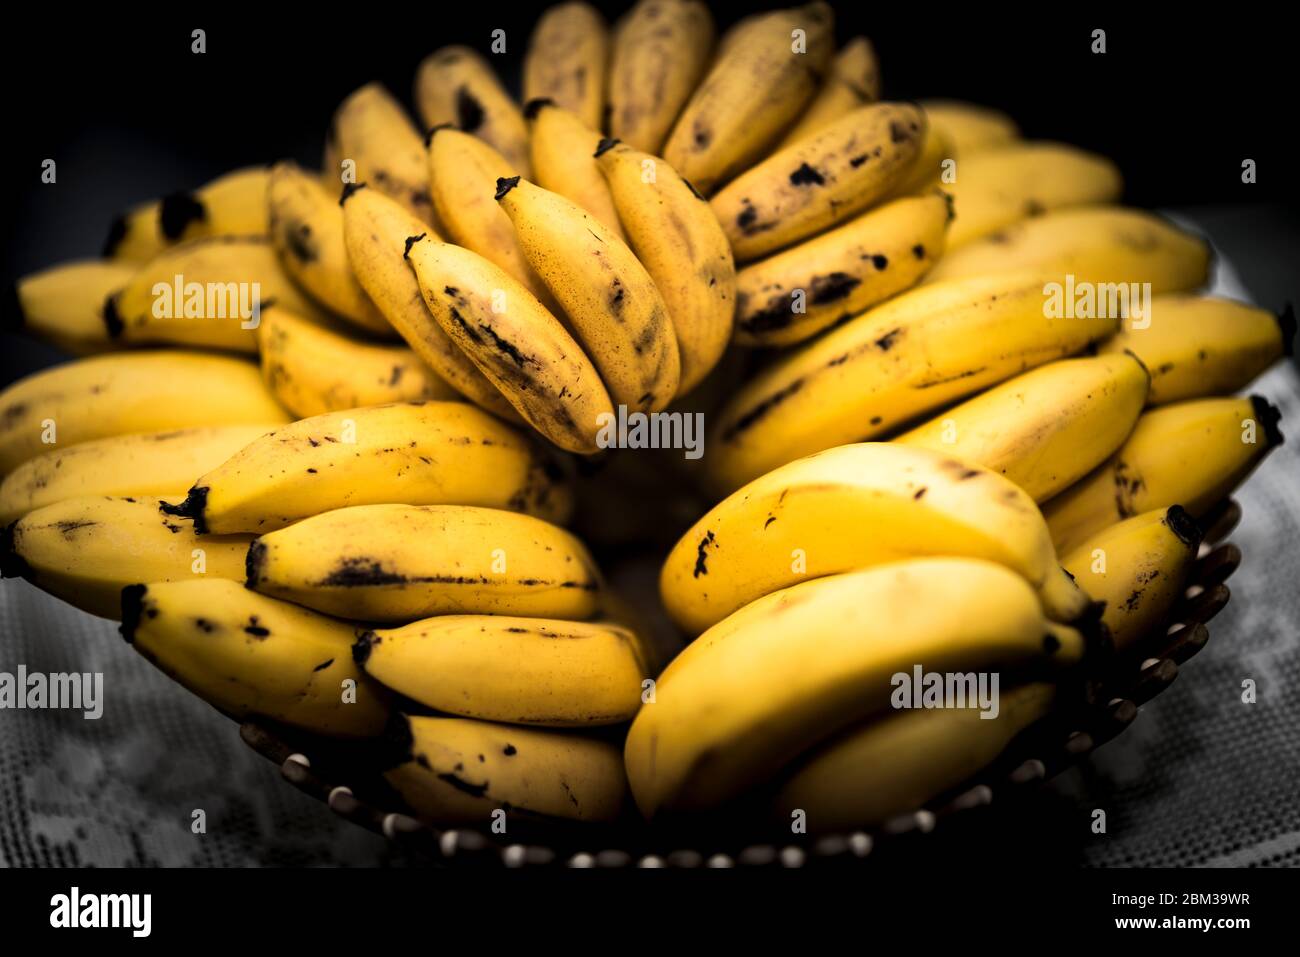 A bunch of yellow bananas in a basket Stock Photo